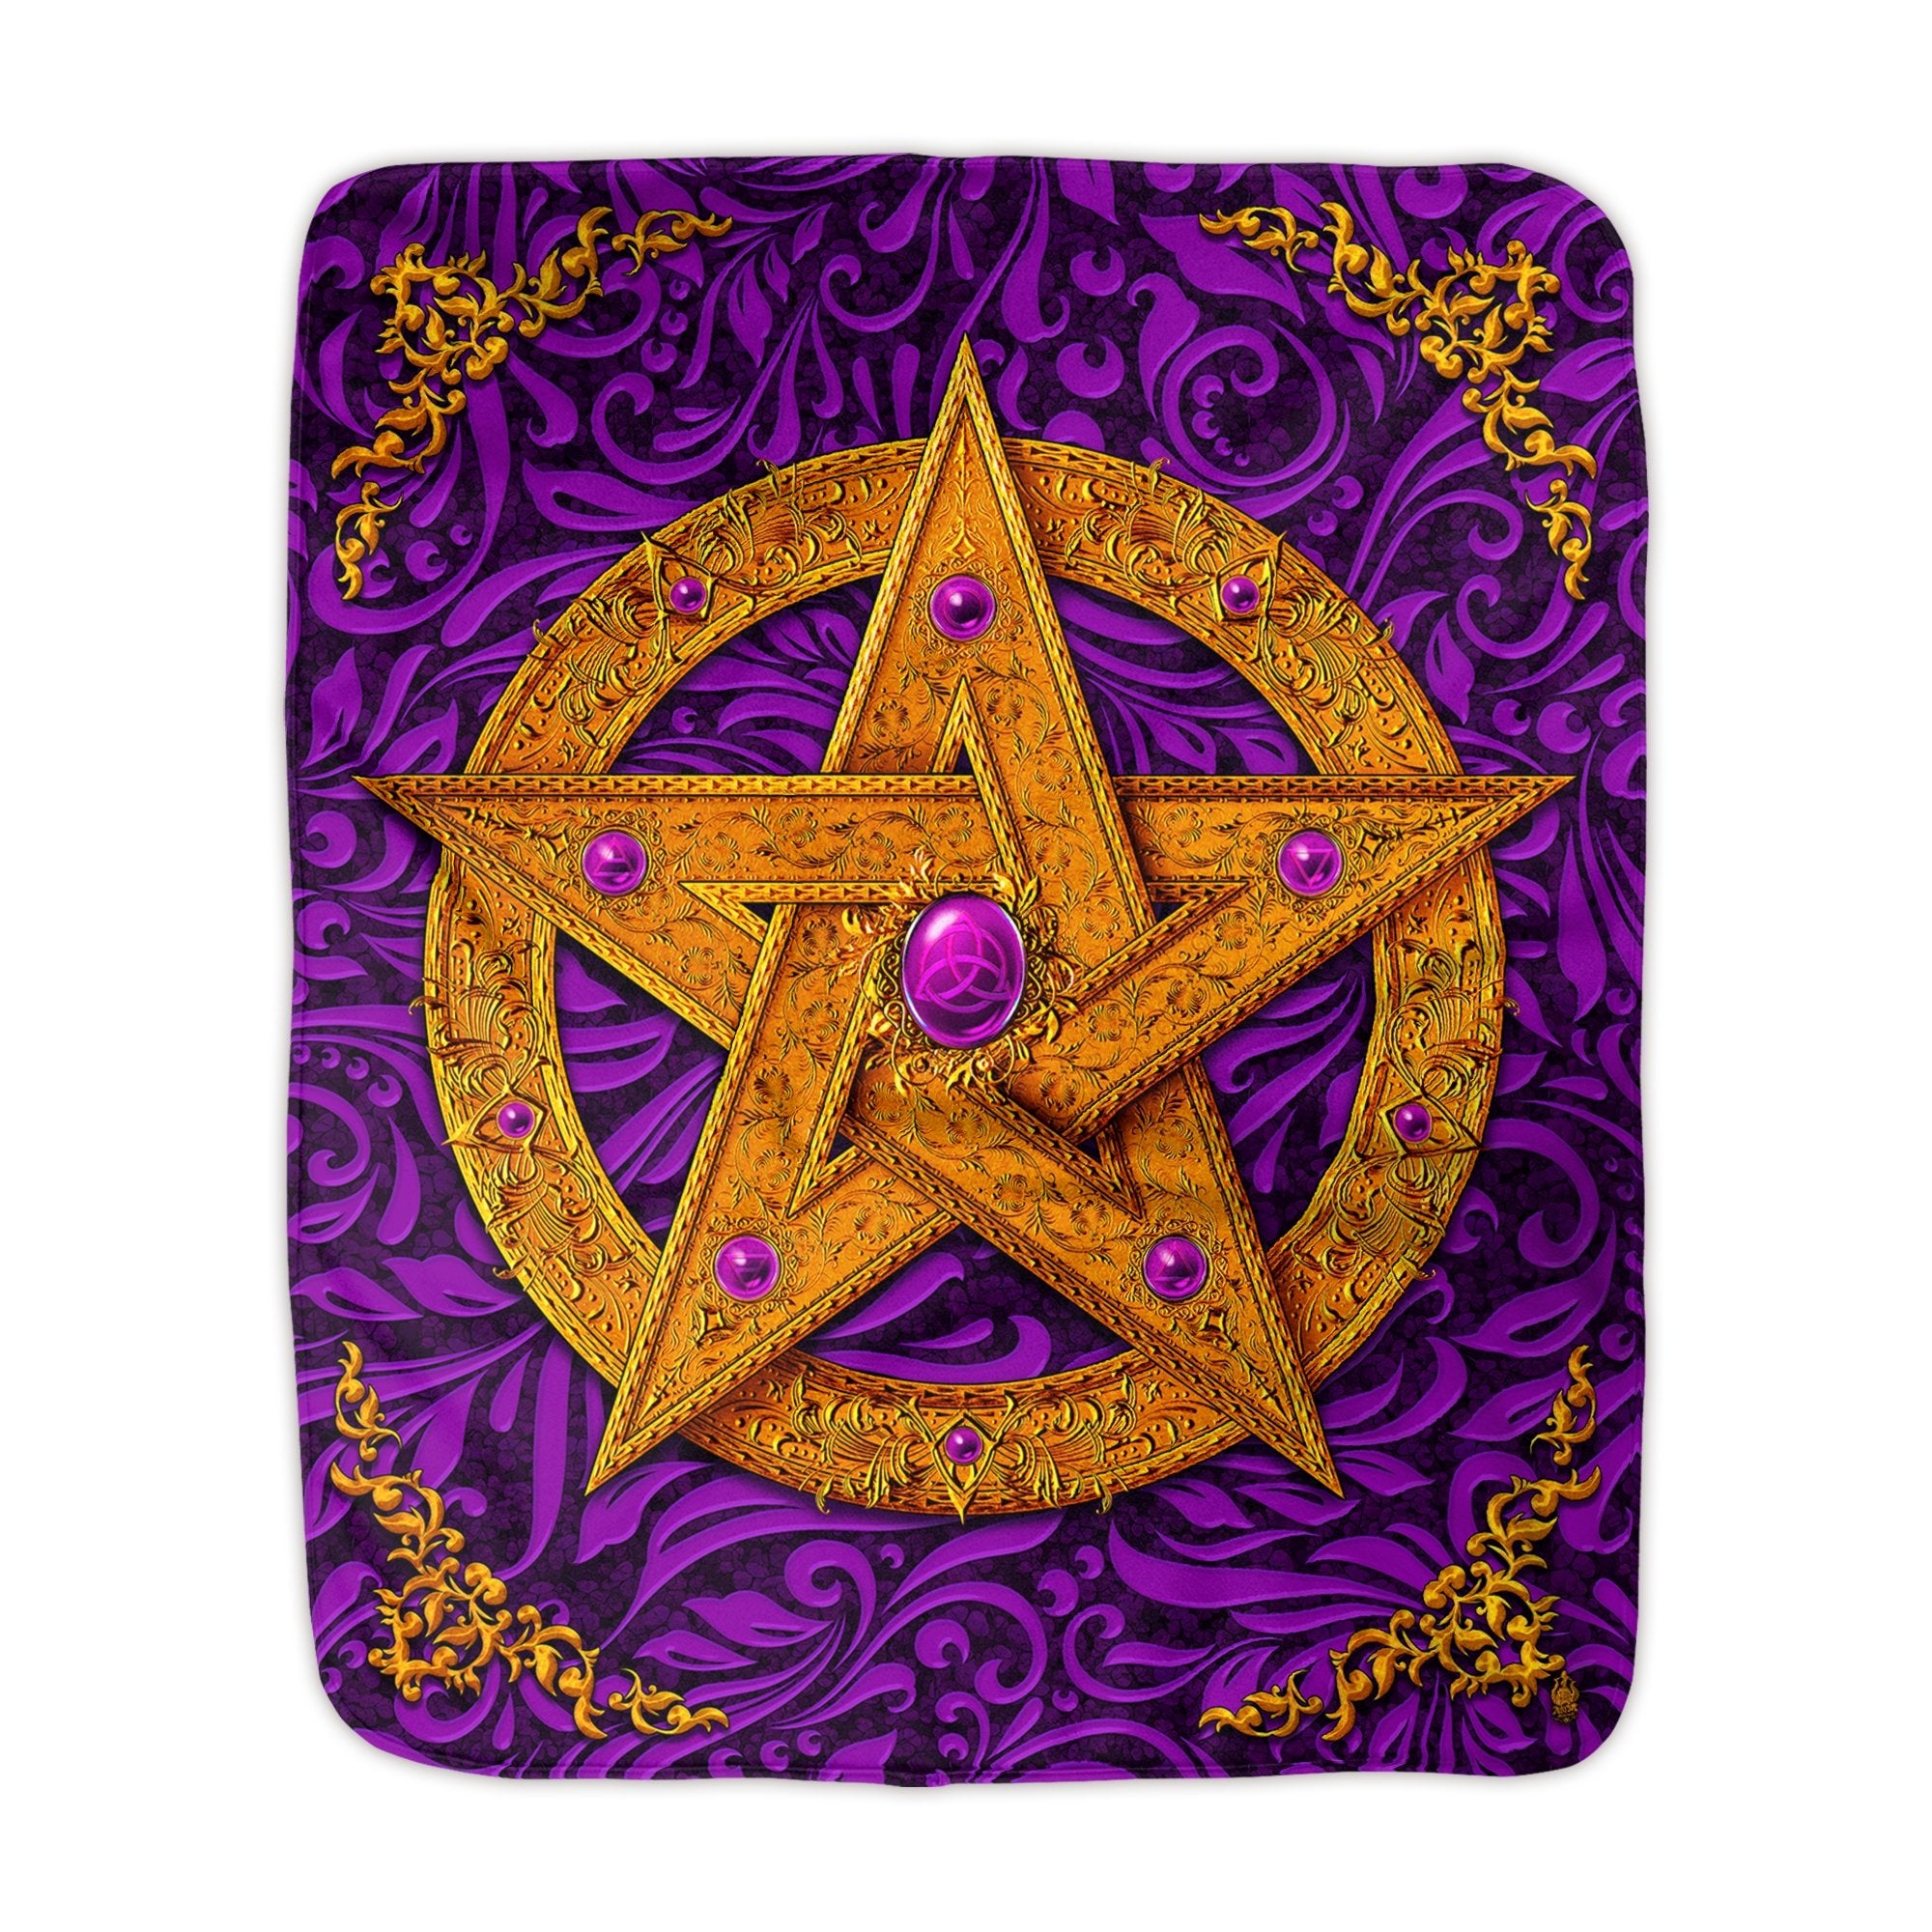 Pentacle Throw Fleece Blanket, Wiccan and Pagan Decor, Witchy Room - Purple - Abysm Internal